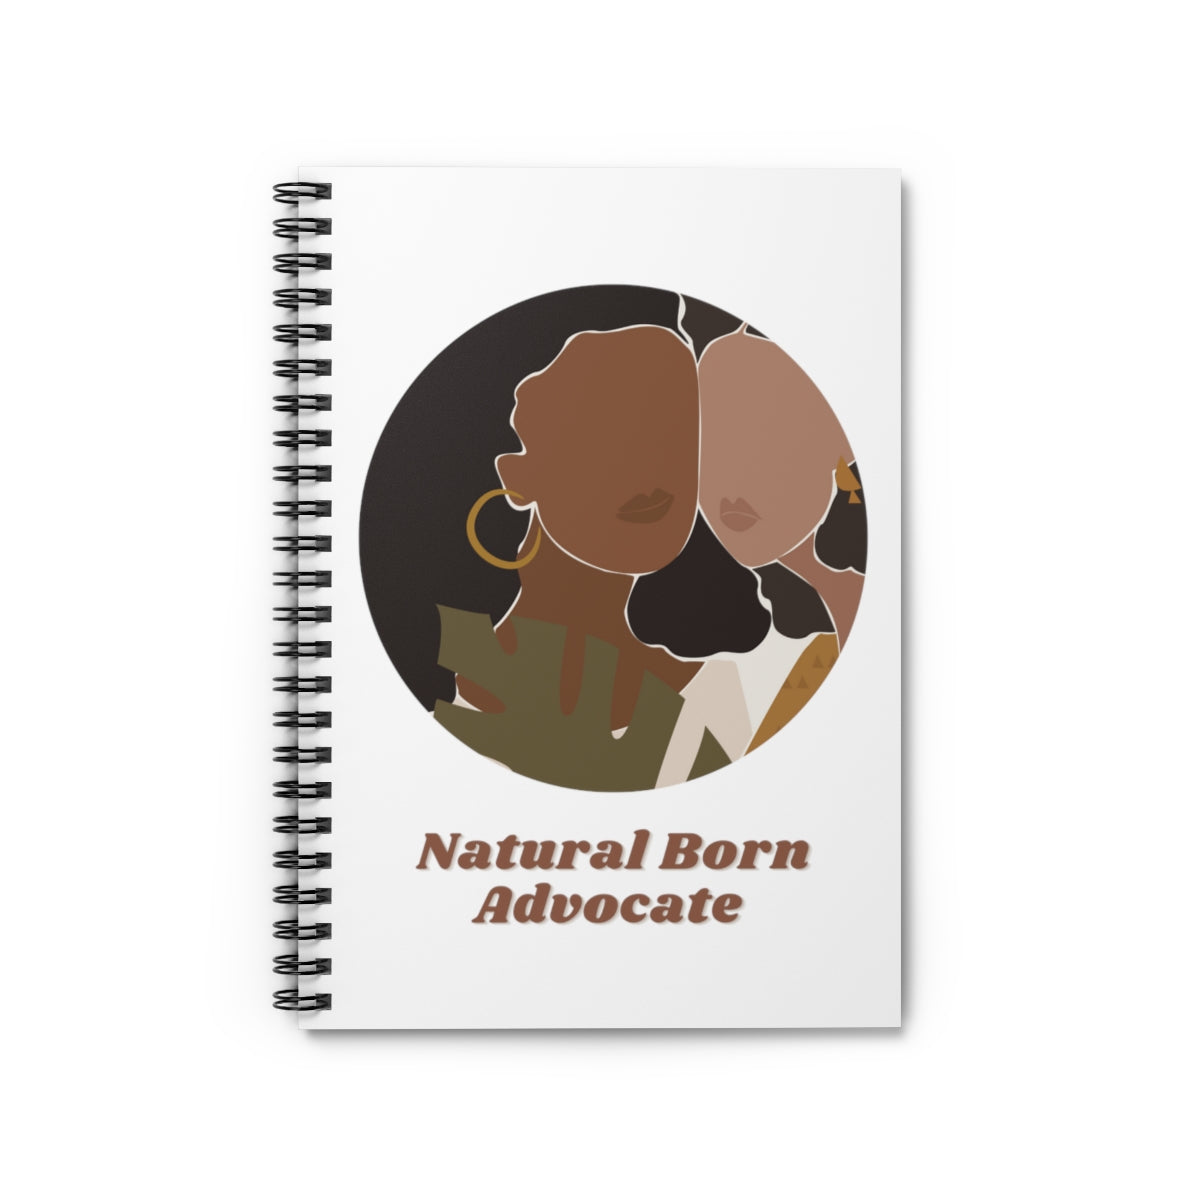 Natural Born Advocate Motivational Durable Journal- Motivational Notebook, Inspirational Notebooks, Women’s Inspirational Journal, Self-Care Gift for Friends, Daily Motivational Journal